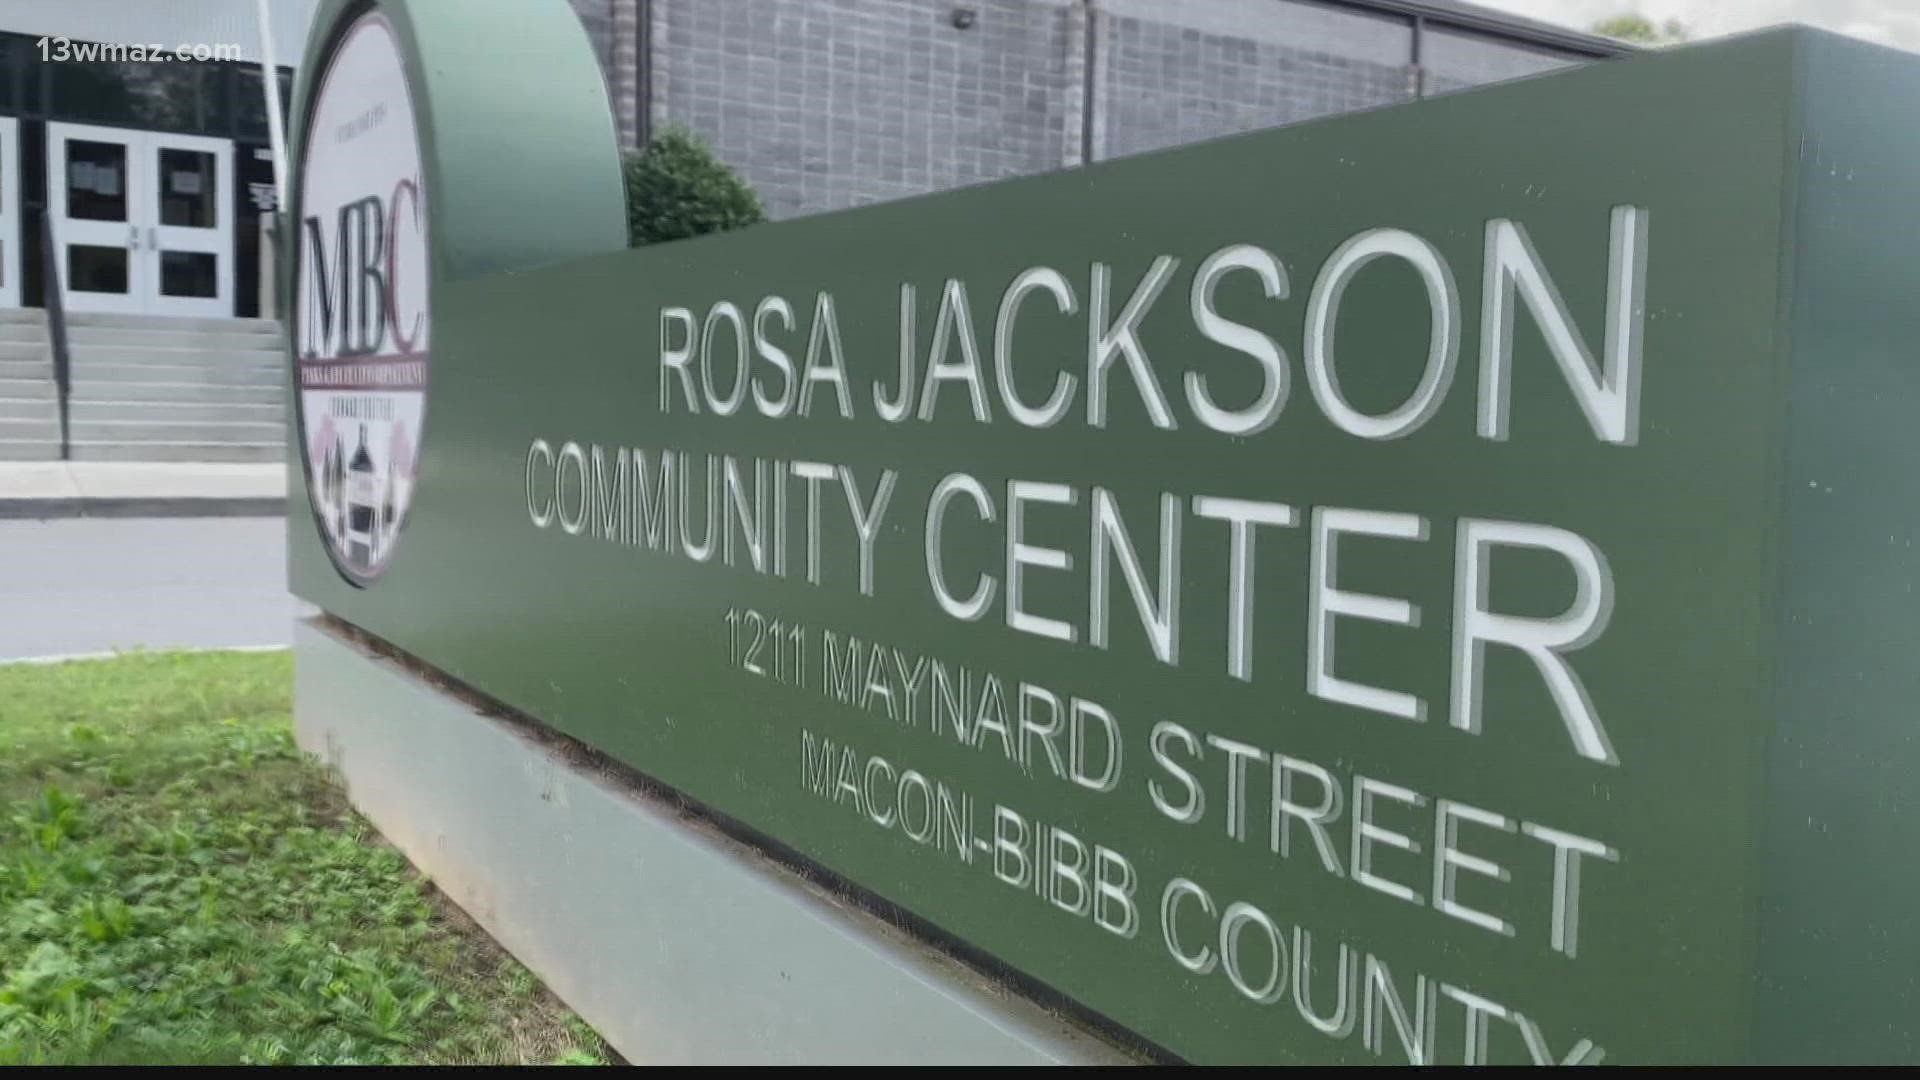 Free food, games, and prizes are just some of the things the Rosa Jackson Center has planned for its 'Family Fun Night.'